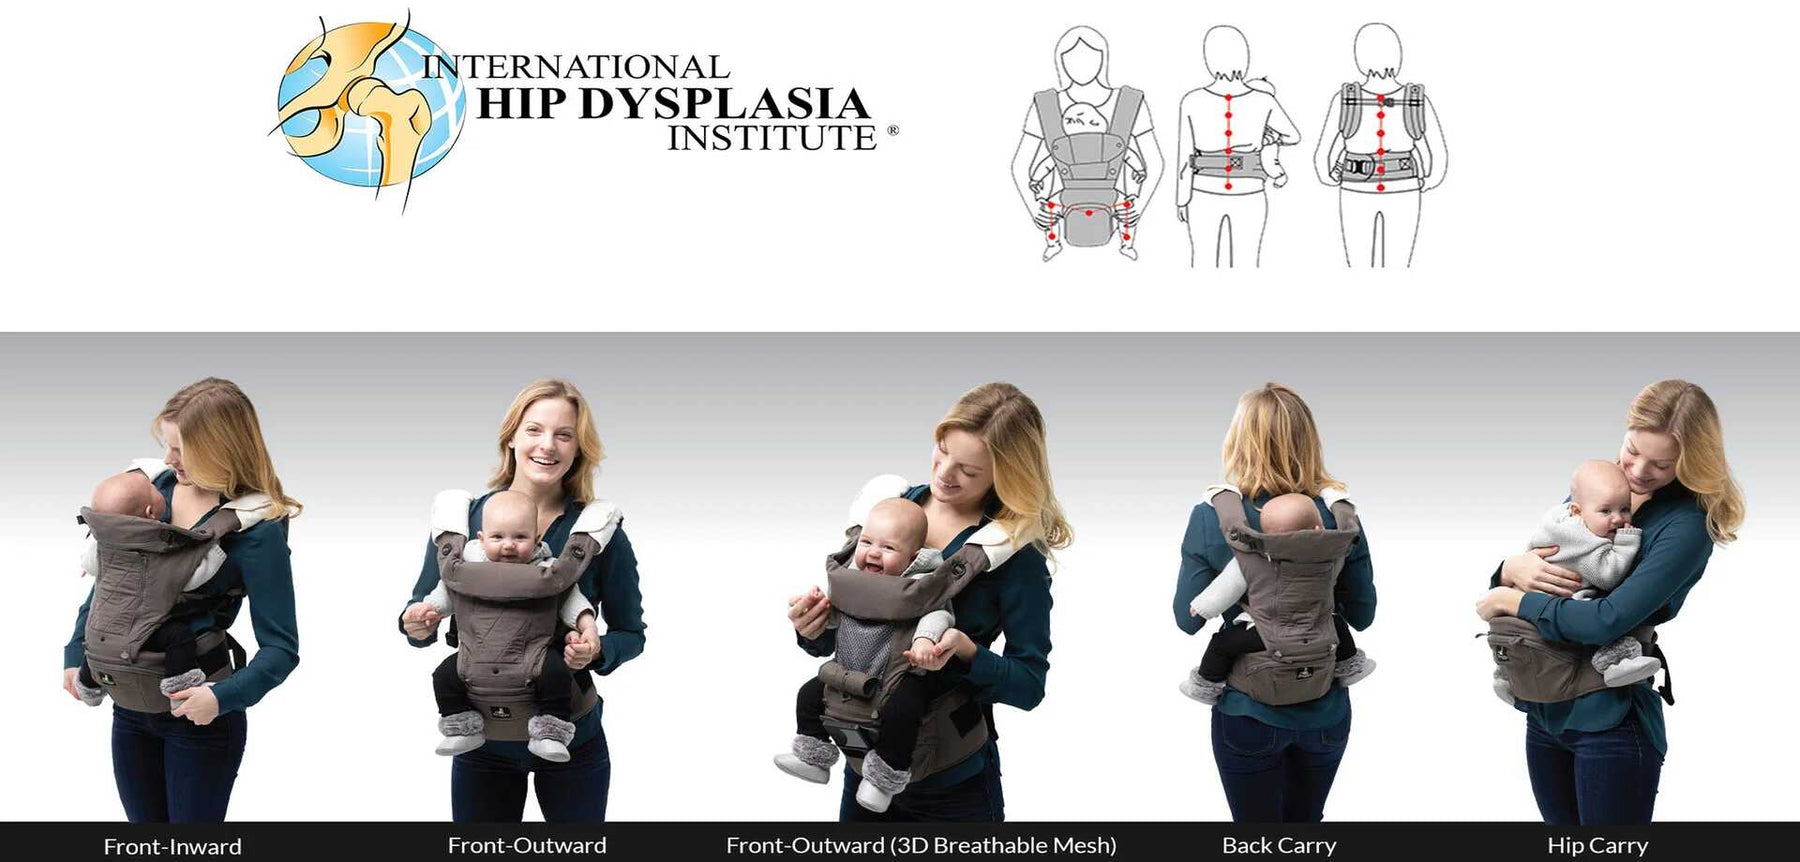 Baby Carriers & Other Equipment - International Hip Dysplasia